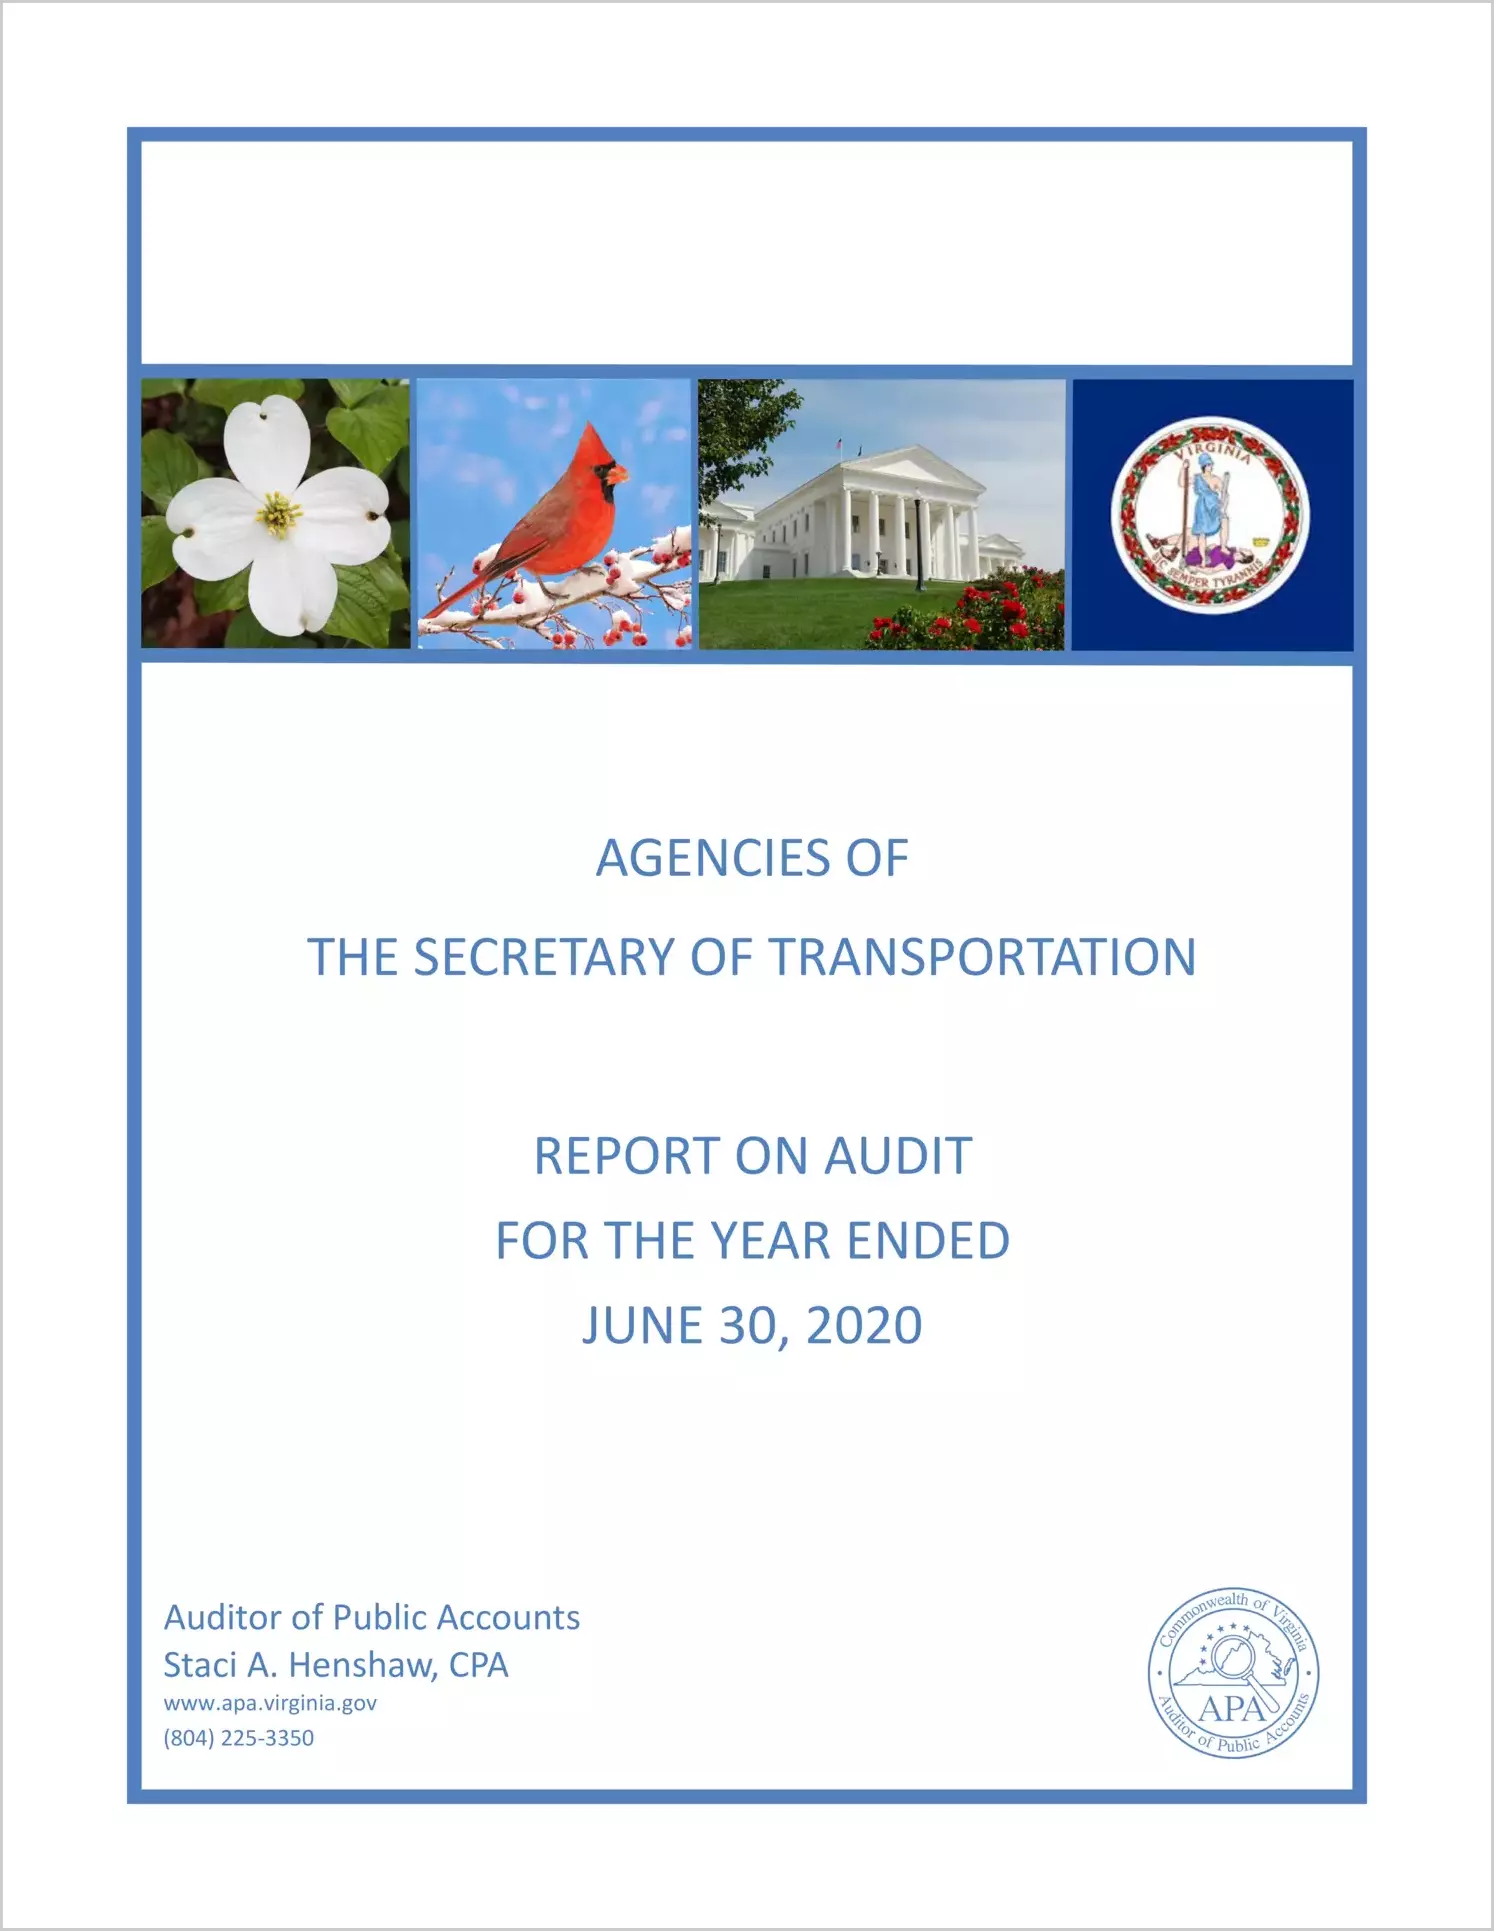 Agencies of the Secretary of Transportation for the year ended June 30, 2020